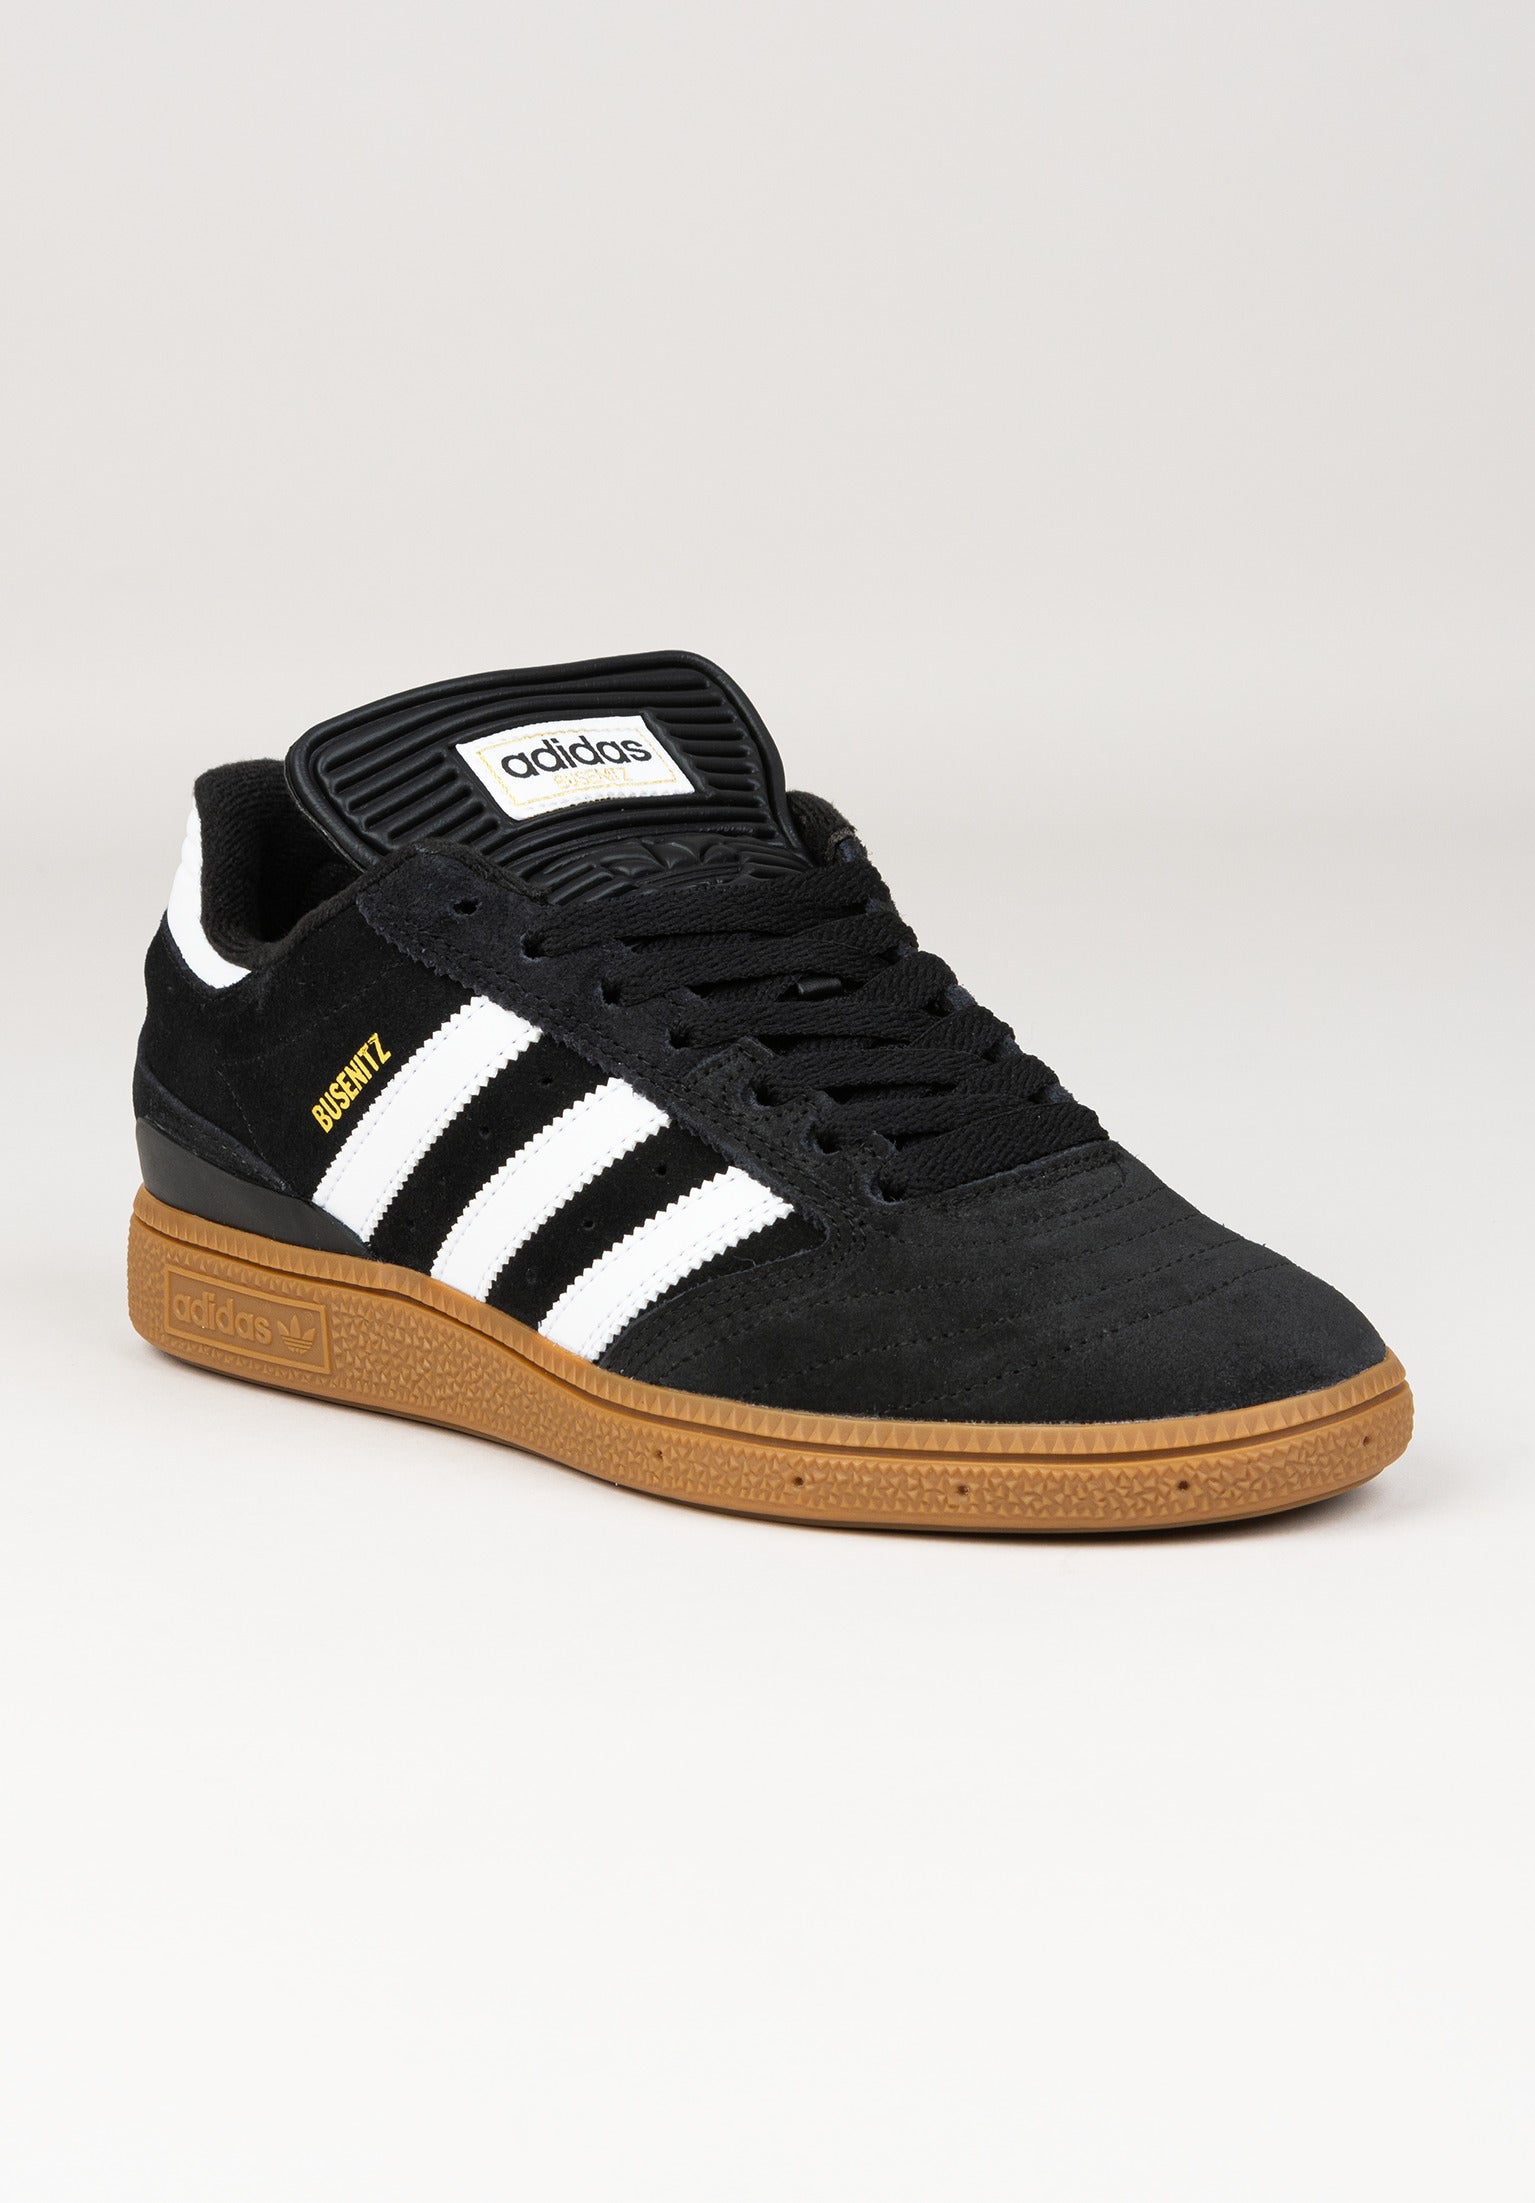 women size chart adidas - OFF-52% >Free Delivery